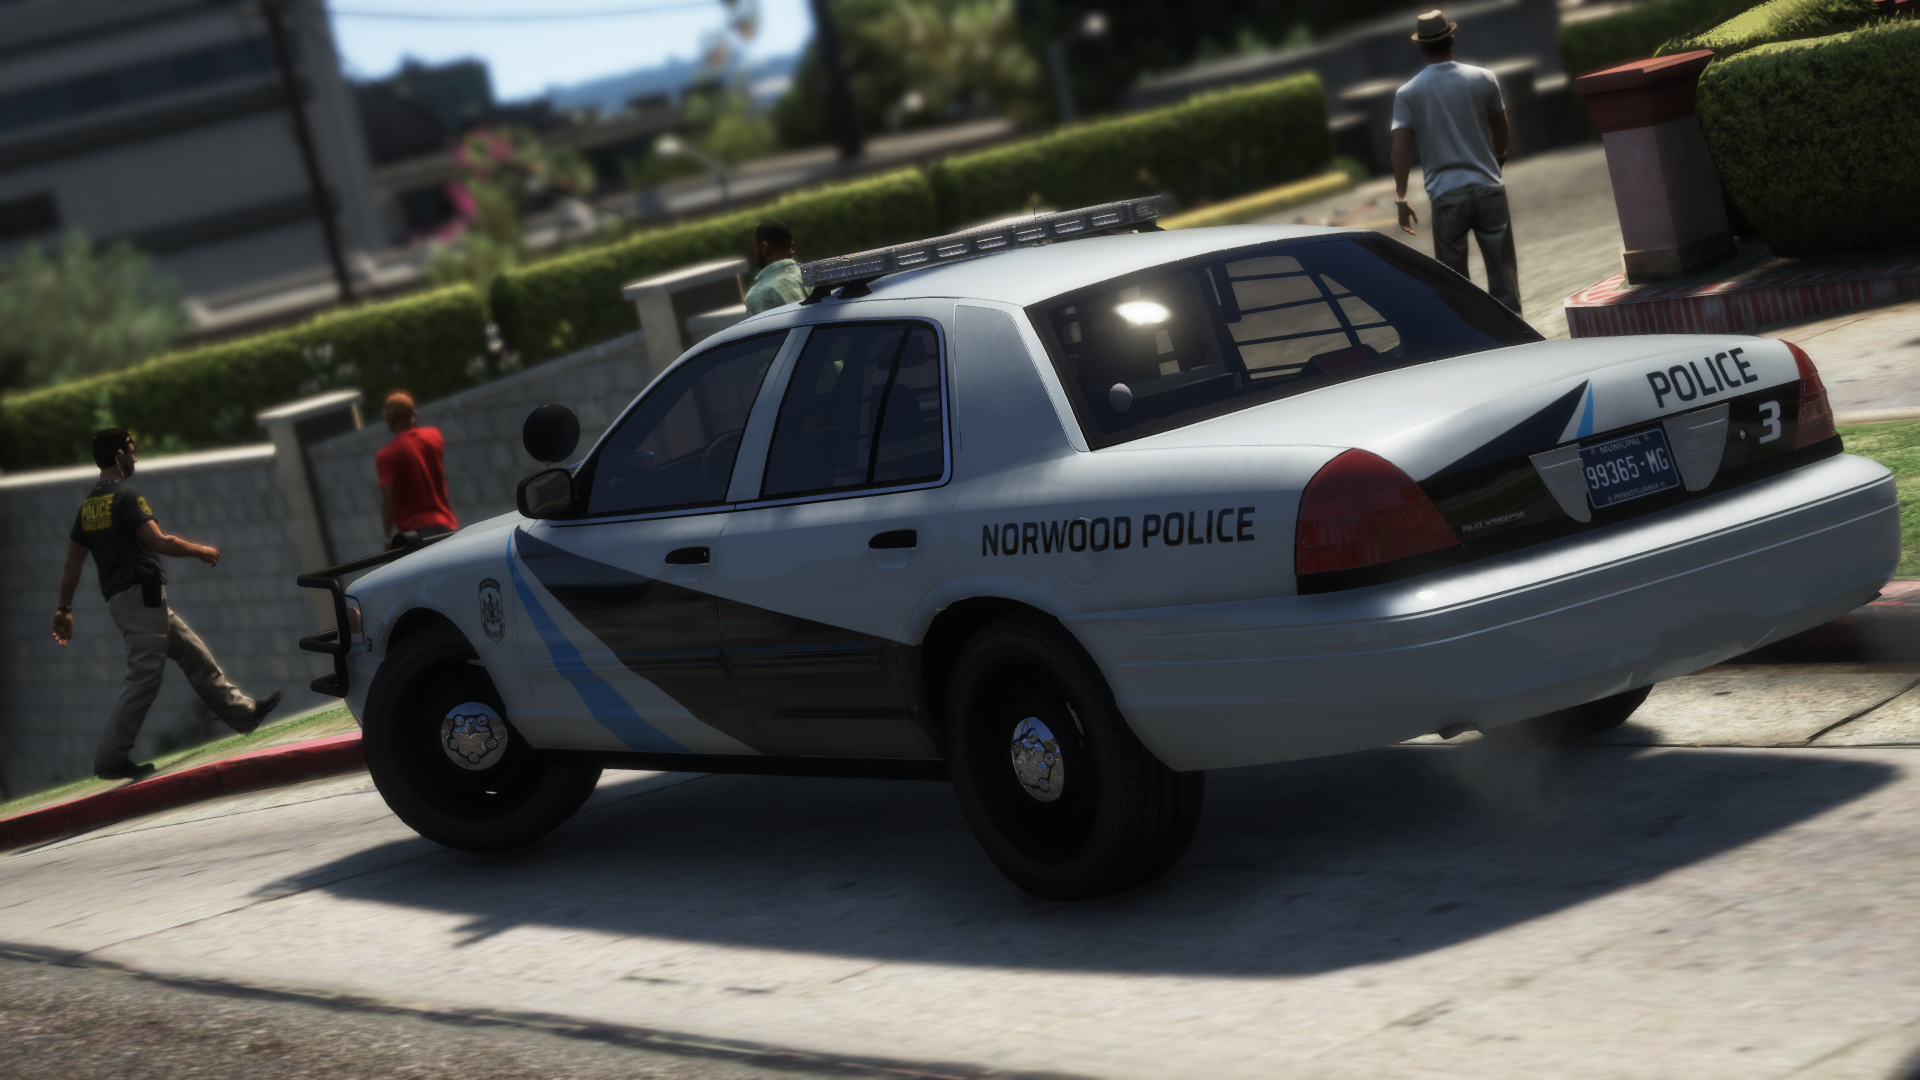 Grand_Theft_Auto_V_10_17_2019_11_41_12_PM.png.a00a27f815719813126cac9dd3011766.png